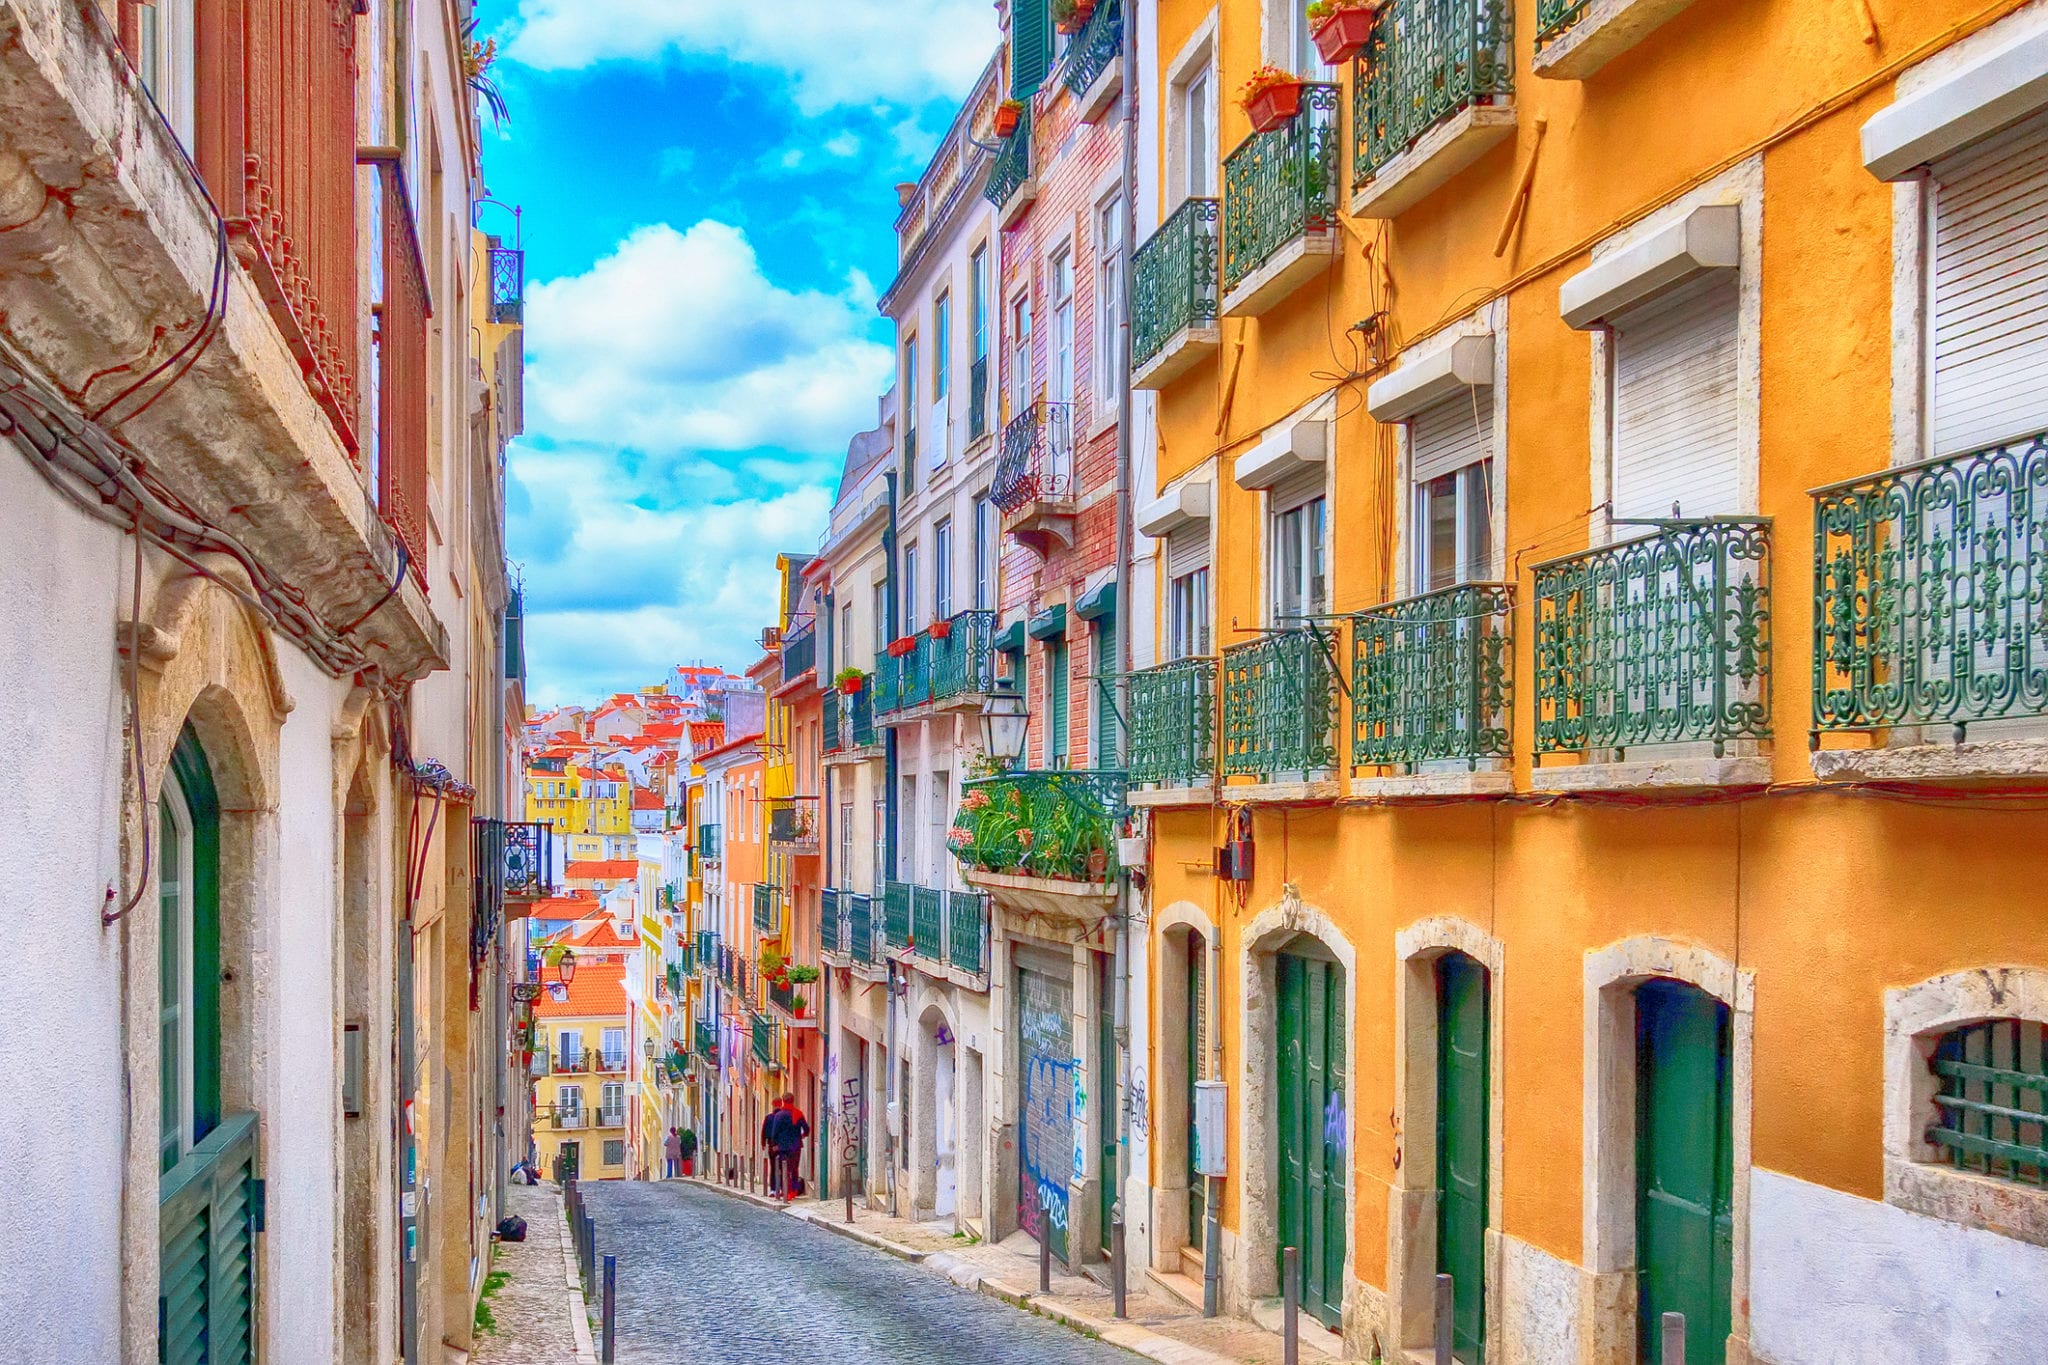 Cost of Living in Portugal: A Guide